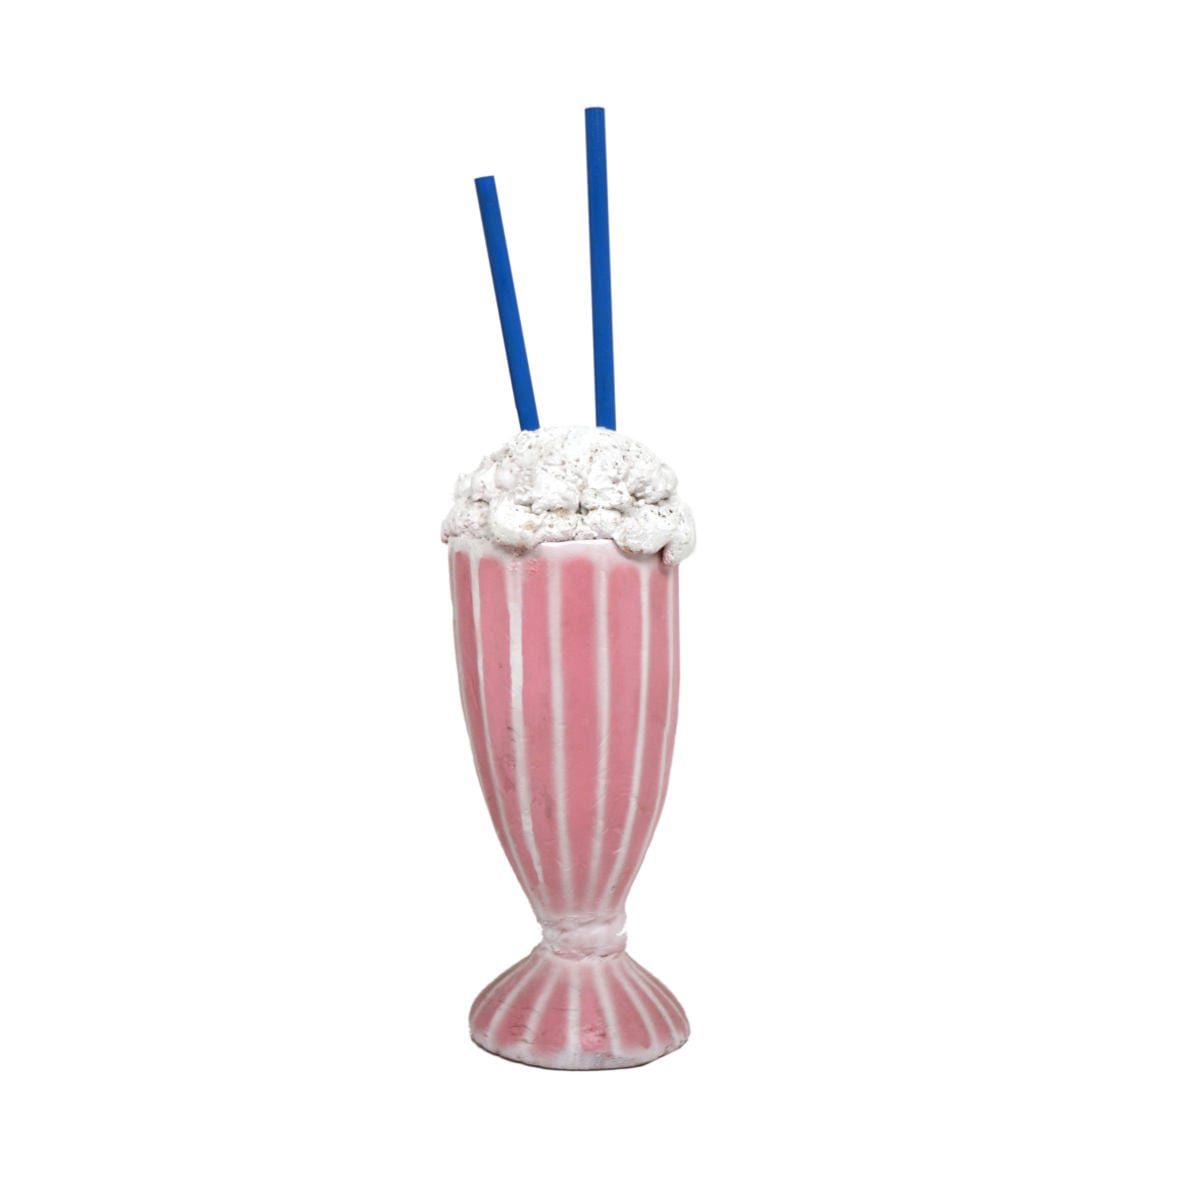 Staw In Milkshake Quote : Top 33 My Milkshake Quotes Famous Quotes Sayings About My Milkshake : A gesture in jamaica similar to shaking hands when meeting someone for the first time, but instead of hands.